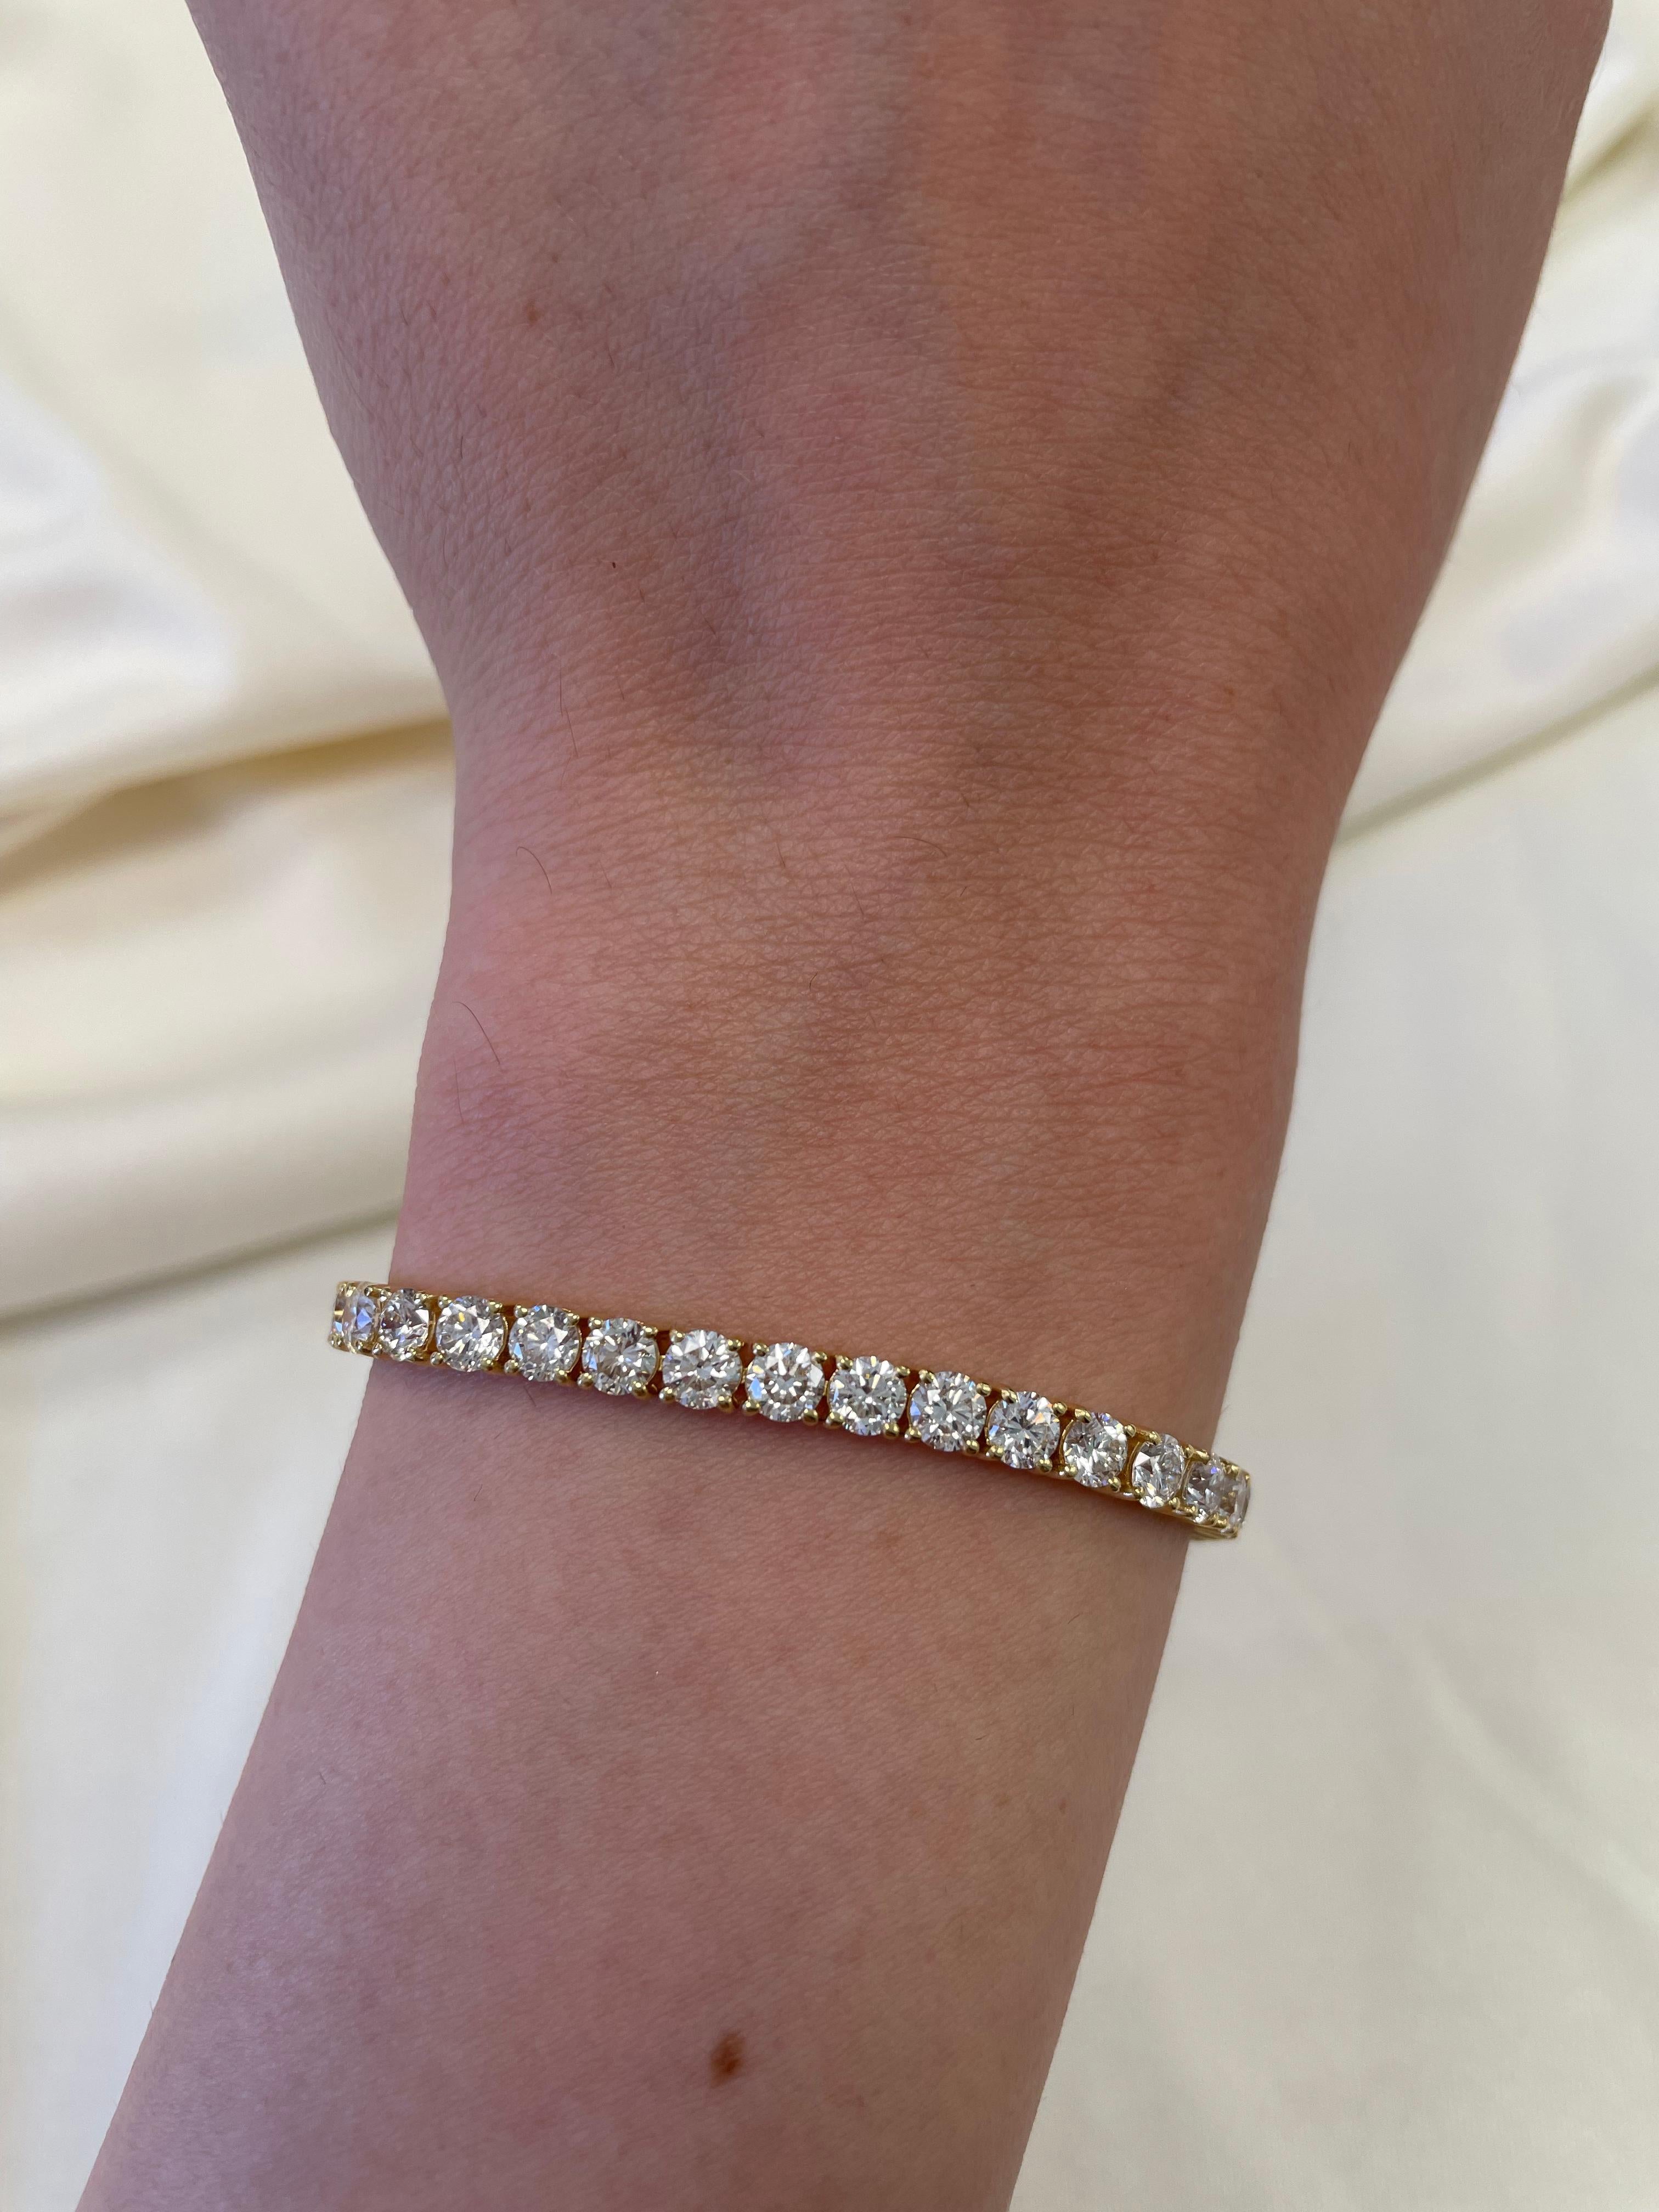 Exquisite and timeless diamonds tennis bracelet, by Alexander Beverly Hills.
42 round brilliant diamonds, 9.06 carats total. Approximately H color and VS clarity. Four prong set in 18k yellow gold, 12.10 grams, 7 inches. 
Accommodated with an